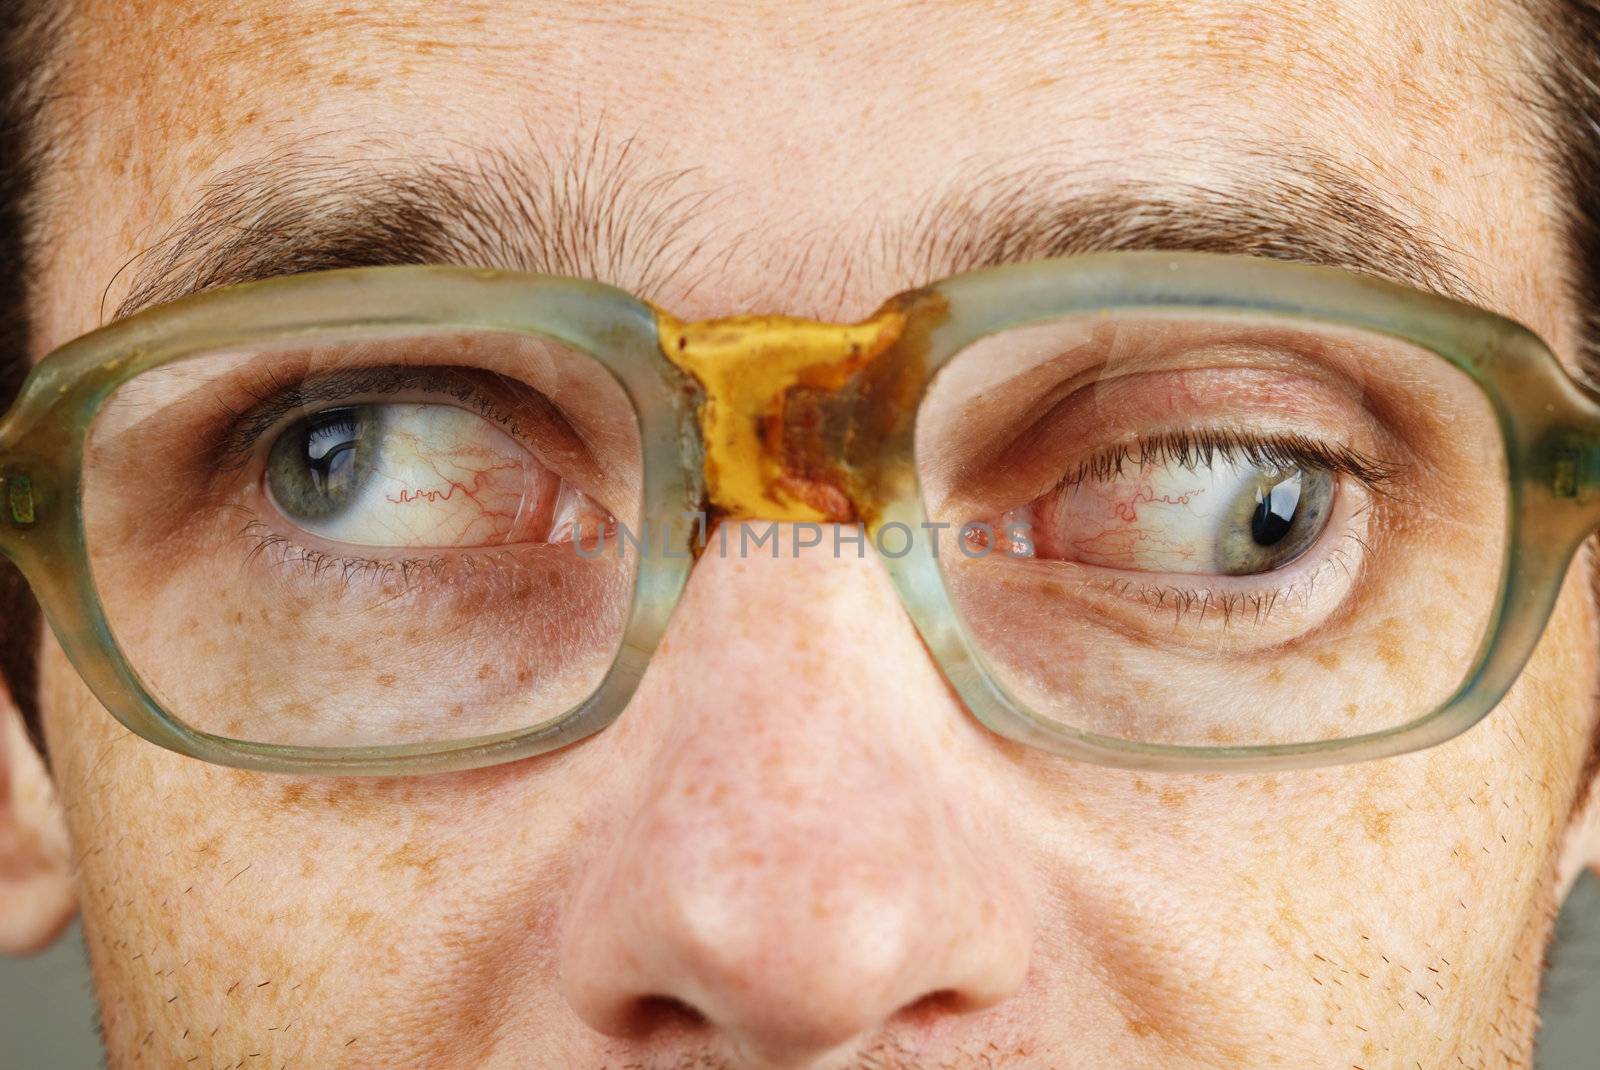 A person suffering from a severe form of strabismus - eye closeup